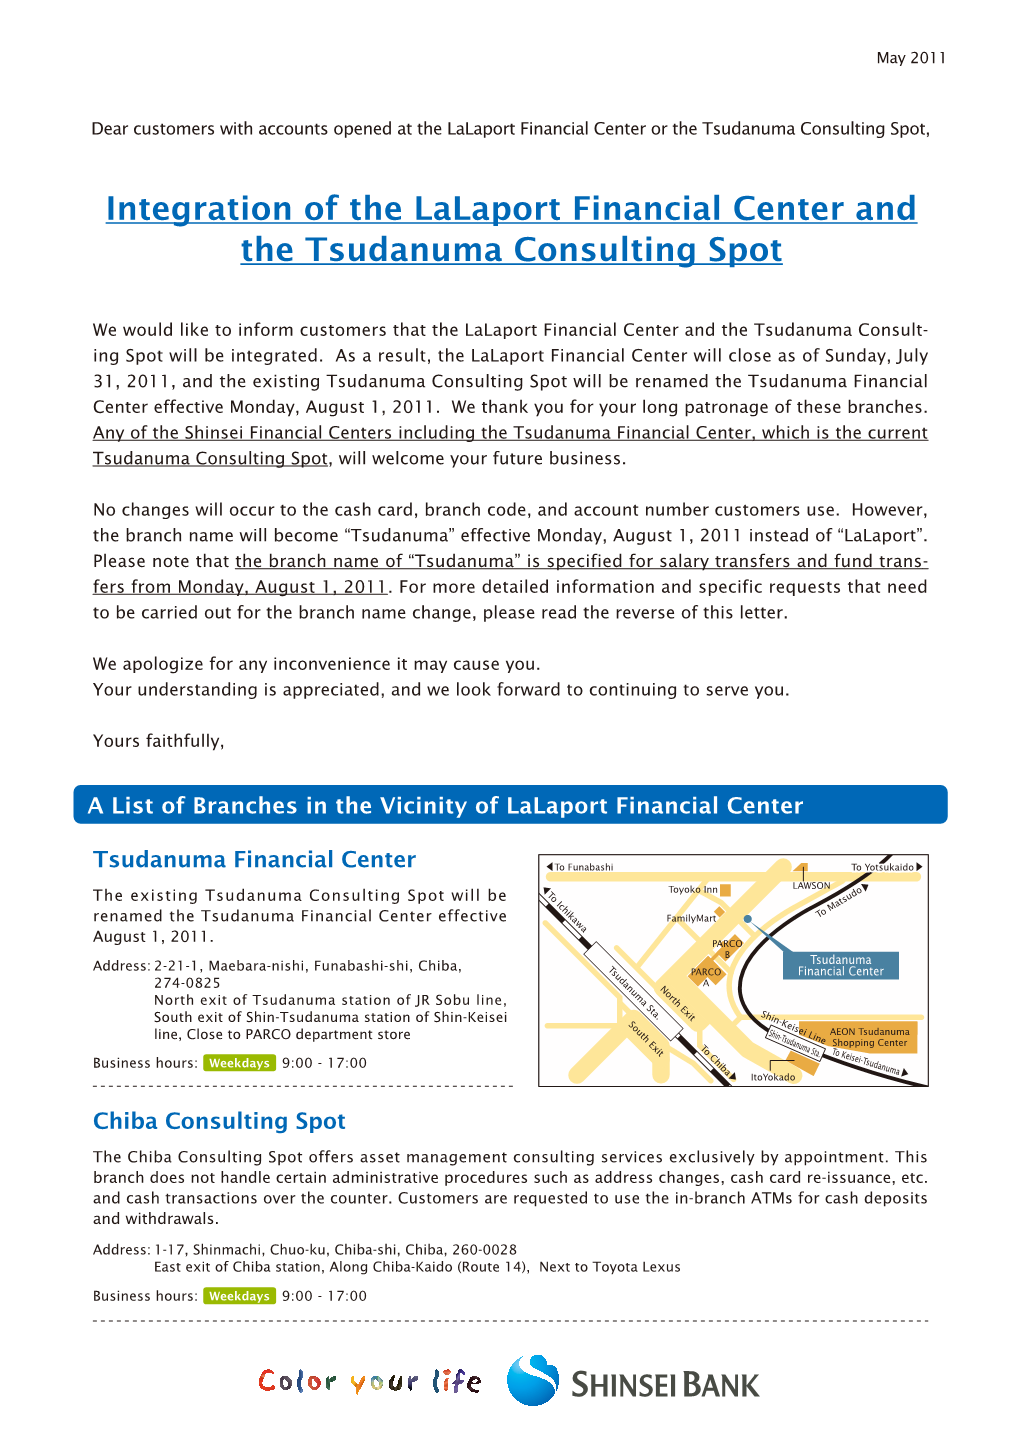 Integration of the Lalaport Financial Center and the Tsudanuma Consulting Spot